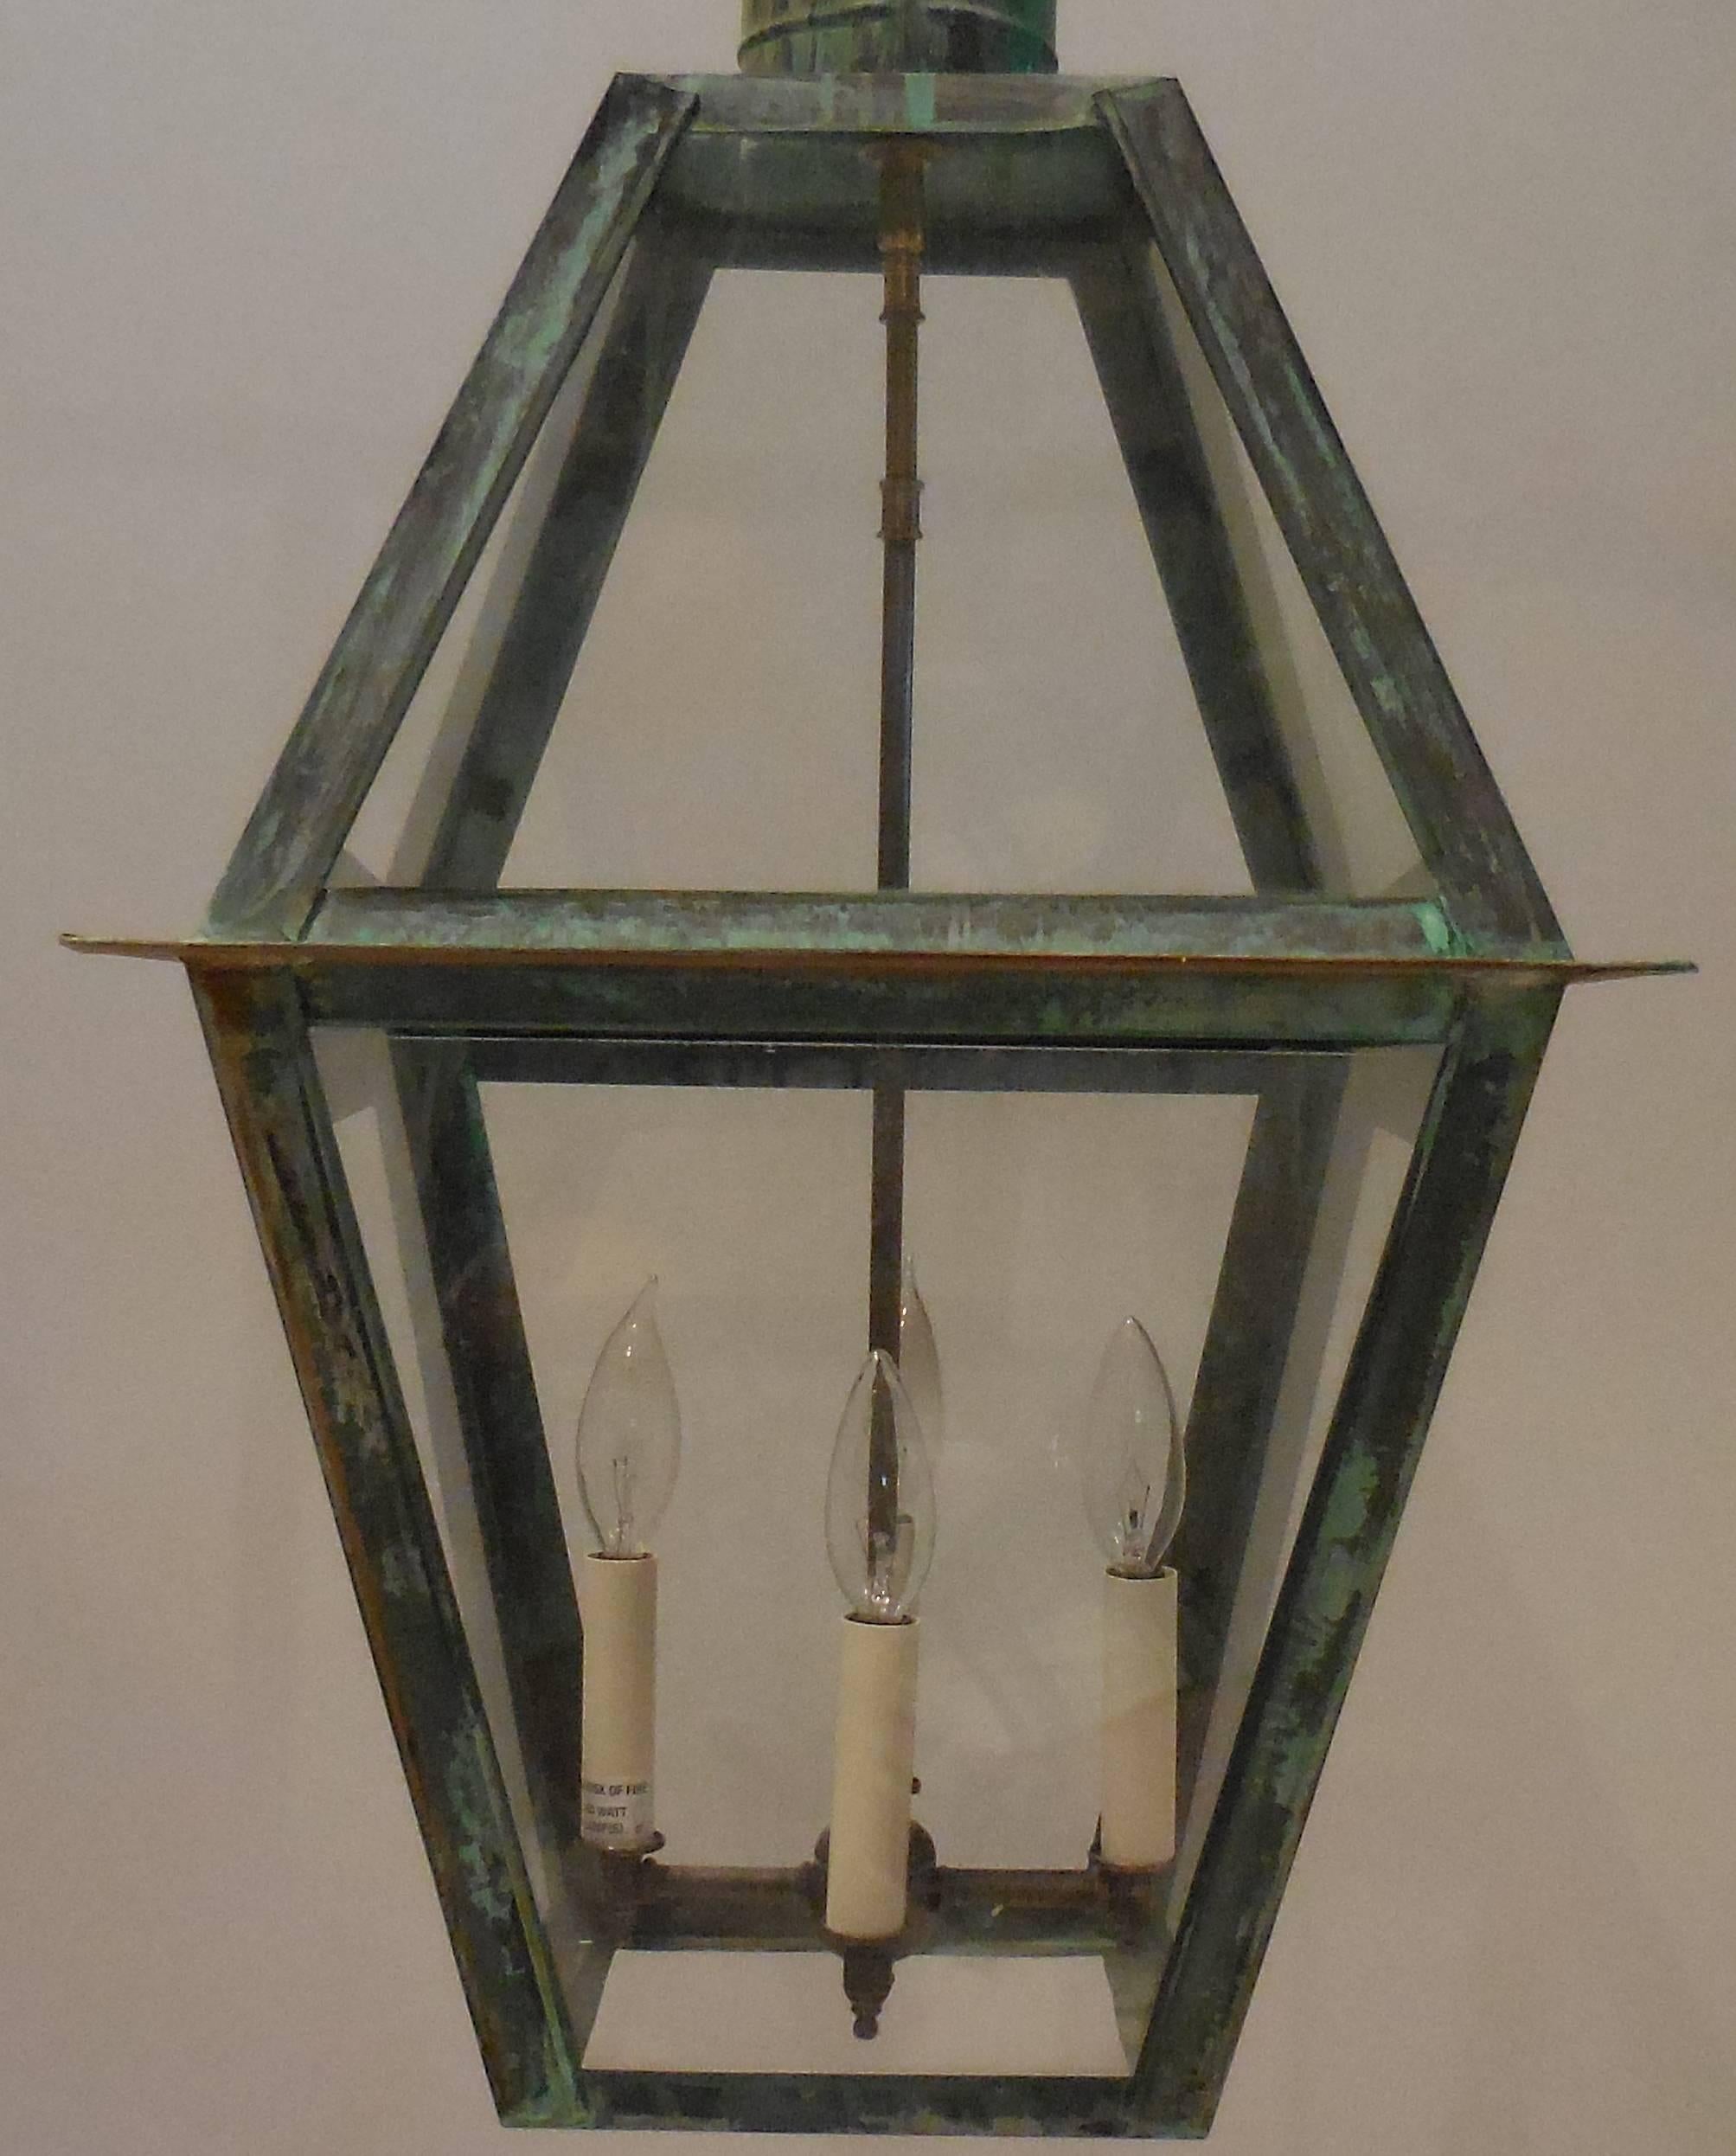 Large architectural lantern made of copper with great looking weathered patina.
Brass cluster of four lights 60/watt each.
UL approve and up to US code.
Copper canopy and chain included.

One more is available. Measures: 15.5 x 15.5 x 36